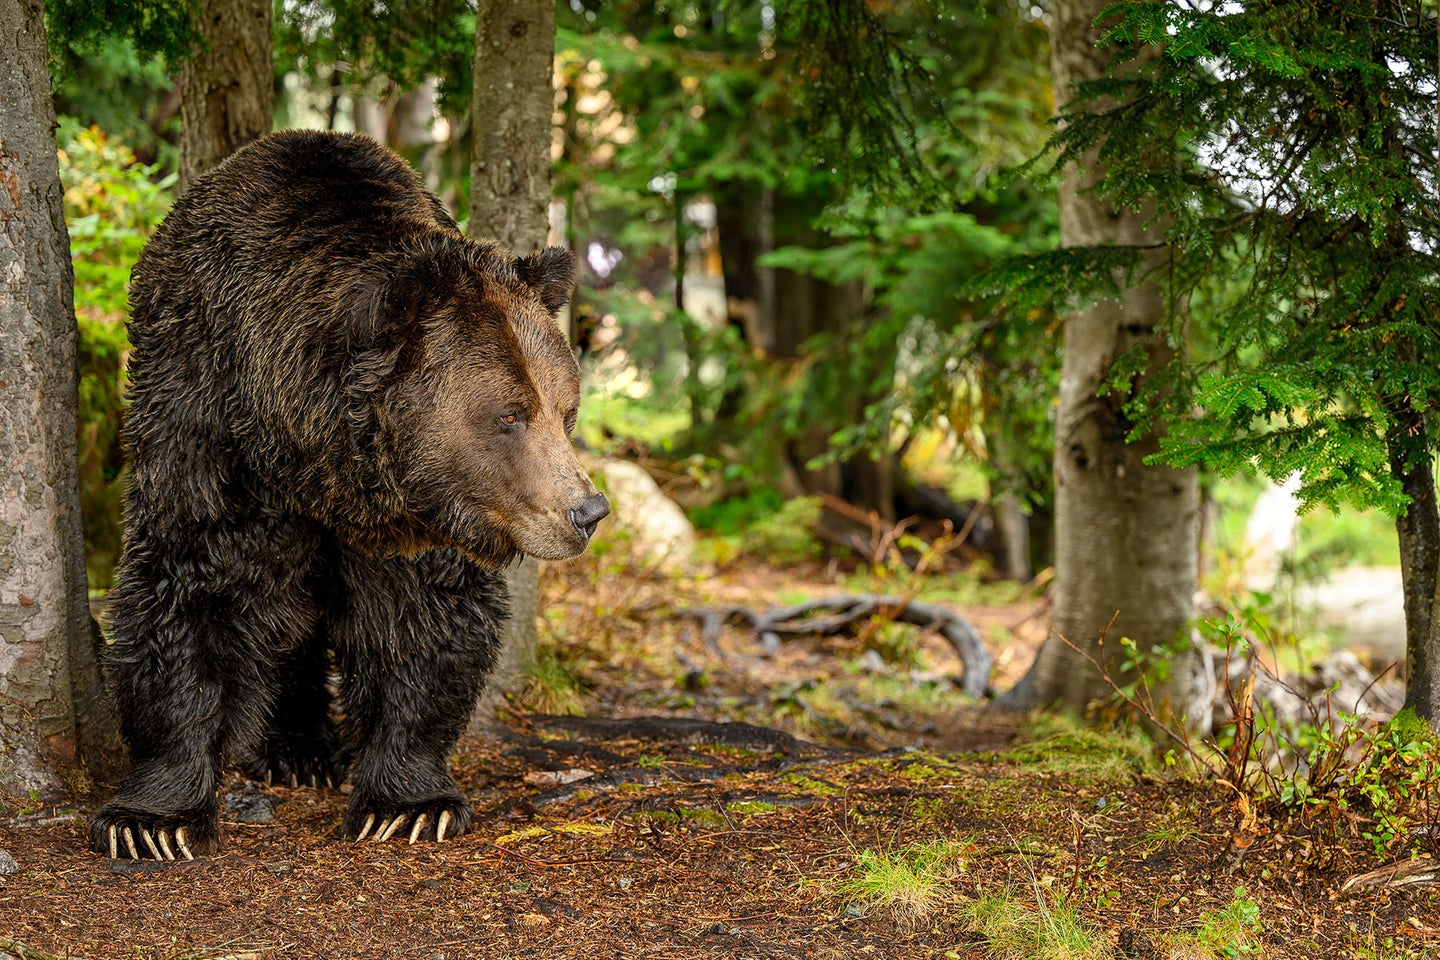 A grizzly bear in the woods.